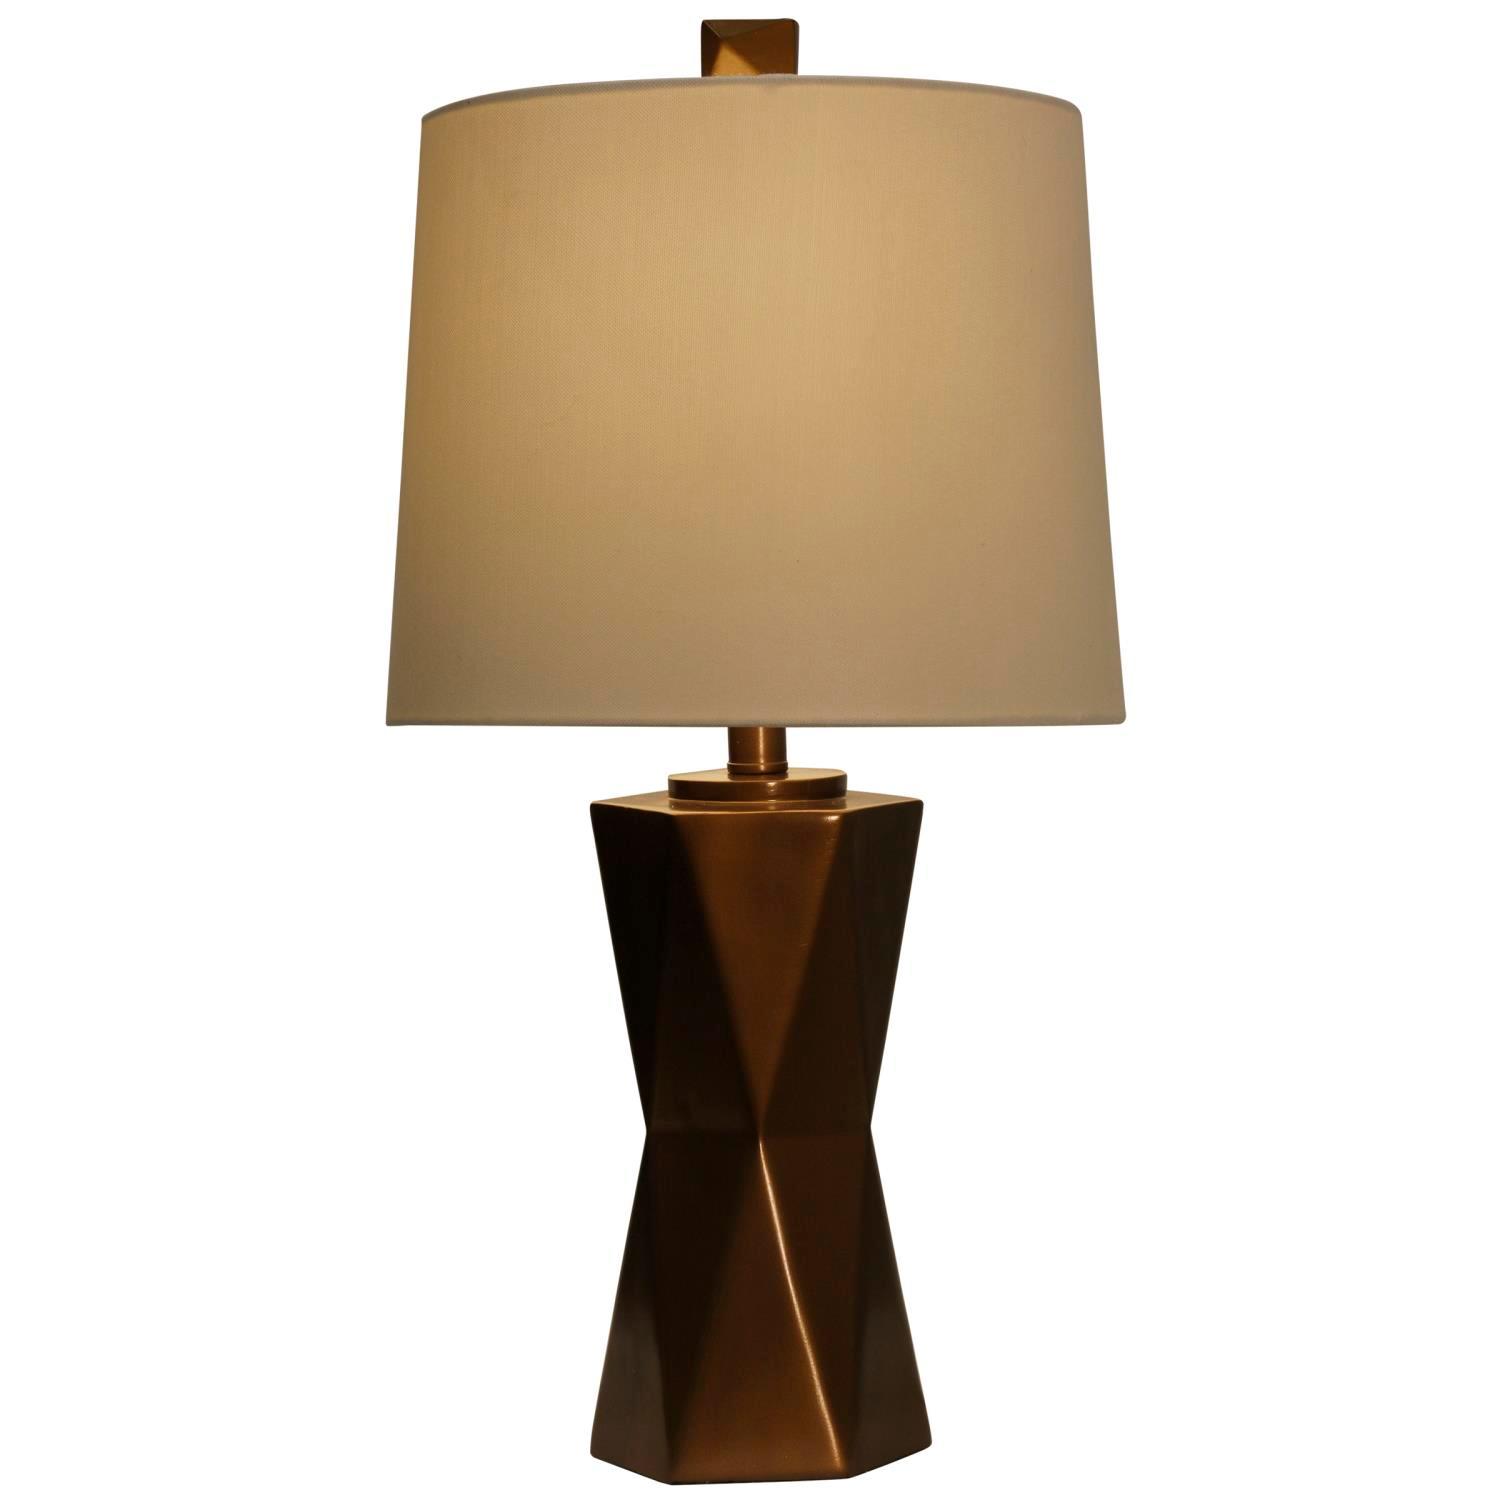 GwG Outlet Poly Table Lamp in Copper Finish